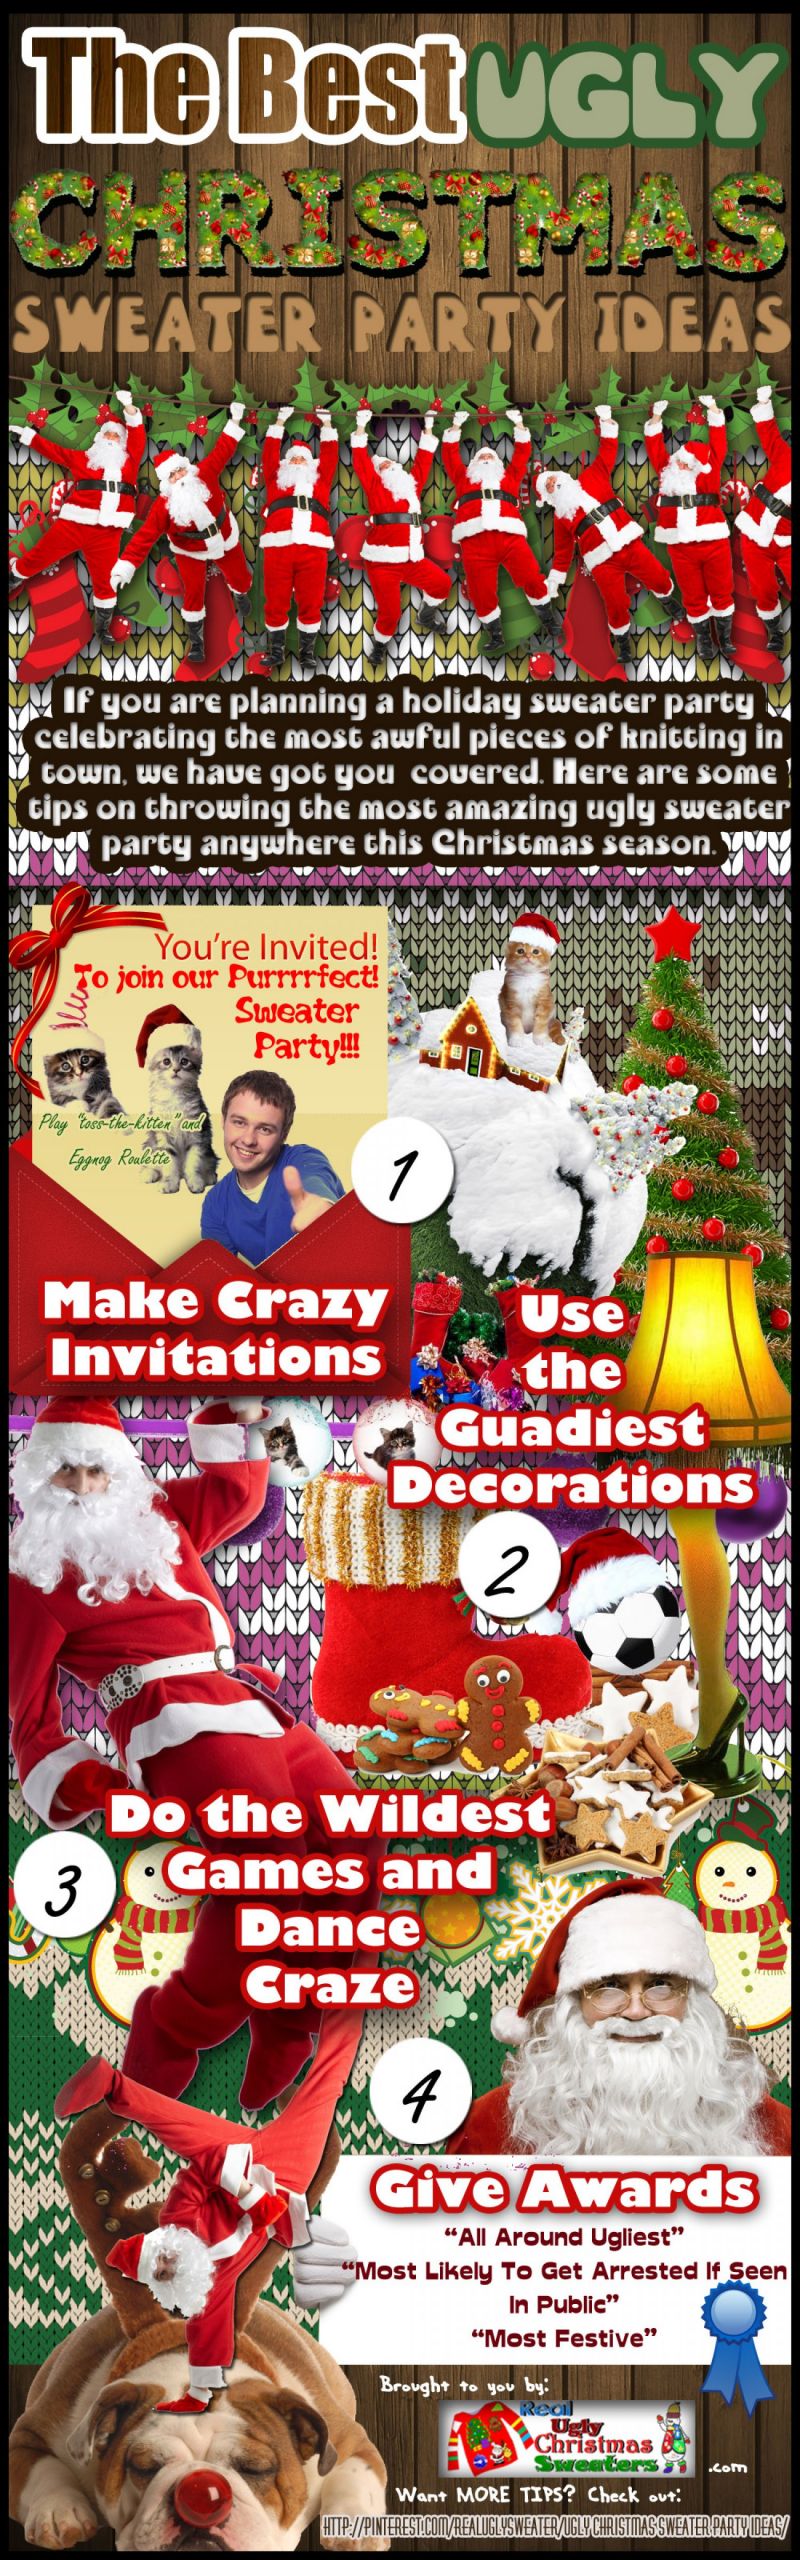 Ugly Christmas Sweater Party Decoration Ideas
 The Best Ugly Christmas Sweater Party Ideas